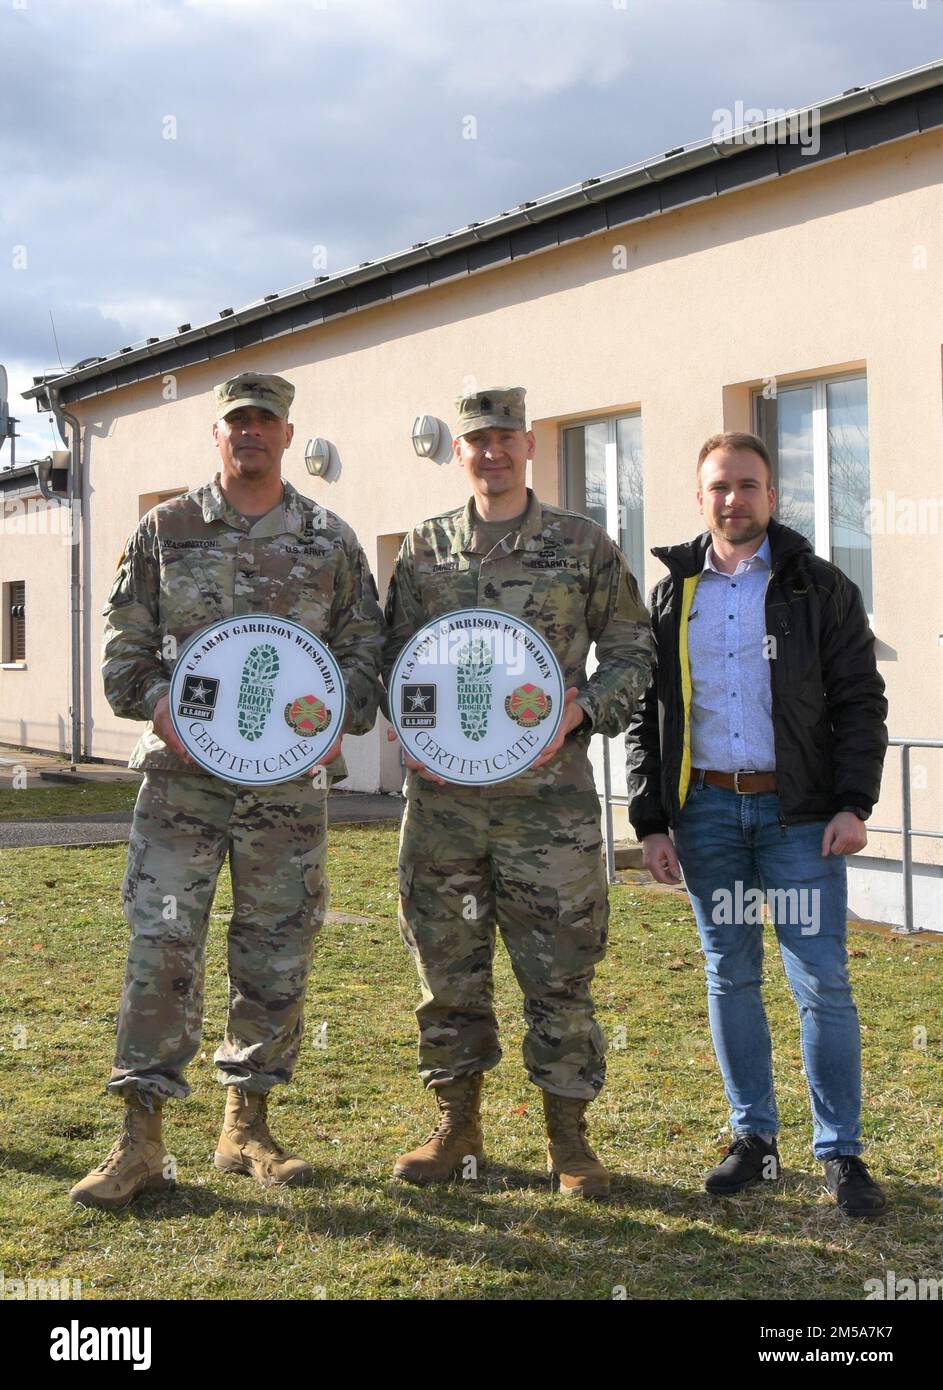 USAG Wiesbaden Commander Col. Mario Washington presents Green Boot Program signs to Headquarters and Headquarters Battalion, U.S. Army Europe-Africa, Battalion Command Sgt. Maj. Joseph Daniel, along with Tomasz Filatow, Energy Manager with the Garrison’s Directorate of Public Works. Stock Photo